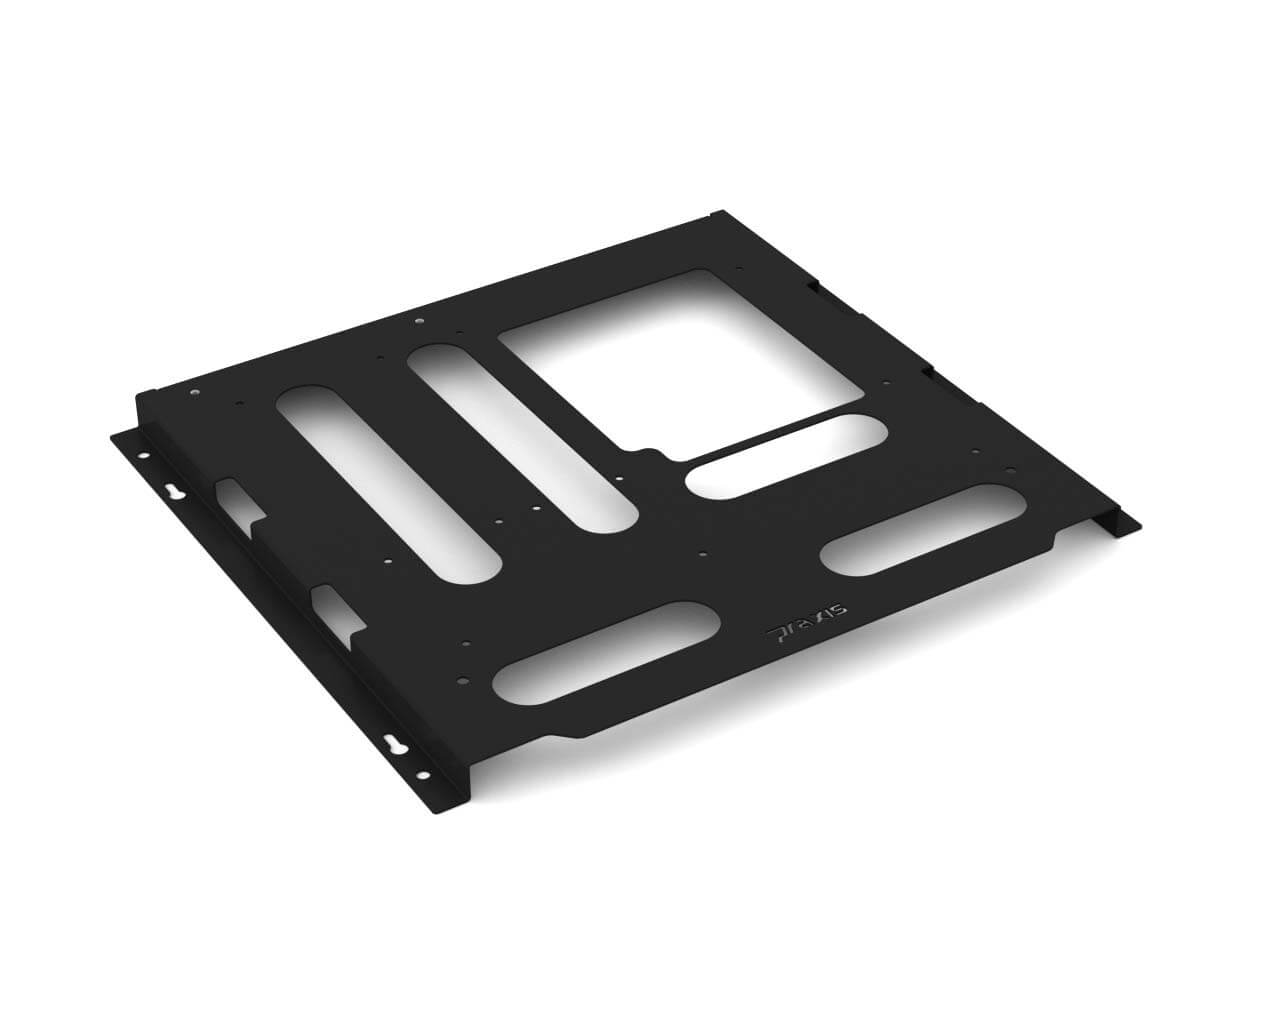 Praxis WetBenchSX Motherboard Tray - PrimoChill - KEEPING IT COOL Black